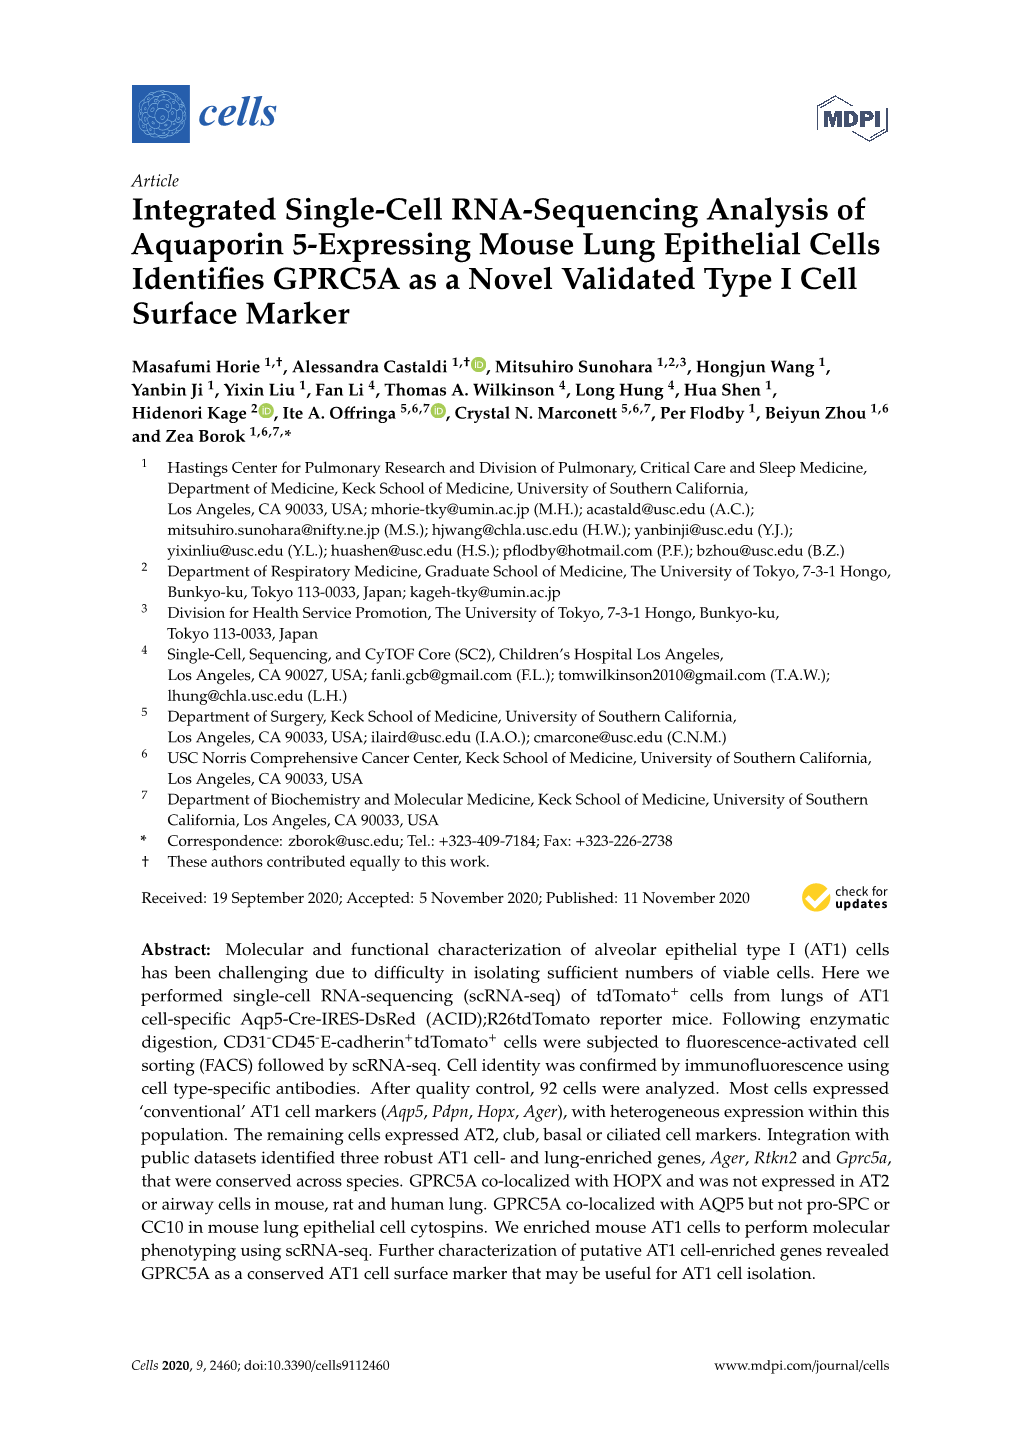 Integrated Single-Cell RNA-Sequencing Analysis of Aquaporin 5-Expressing Mouse Lung Epithelial Cells Identifies GPRC5A As a Nove